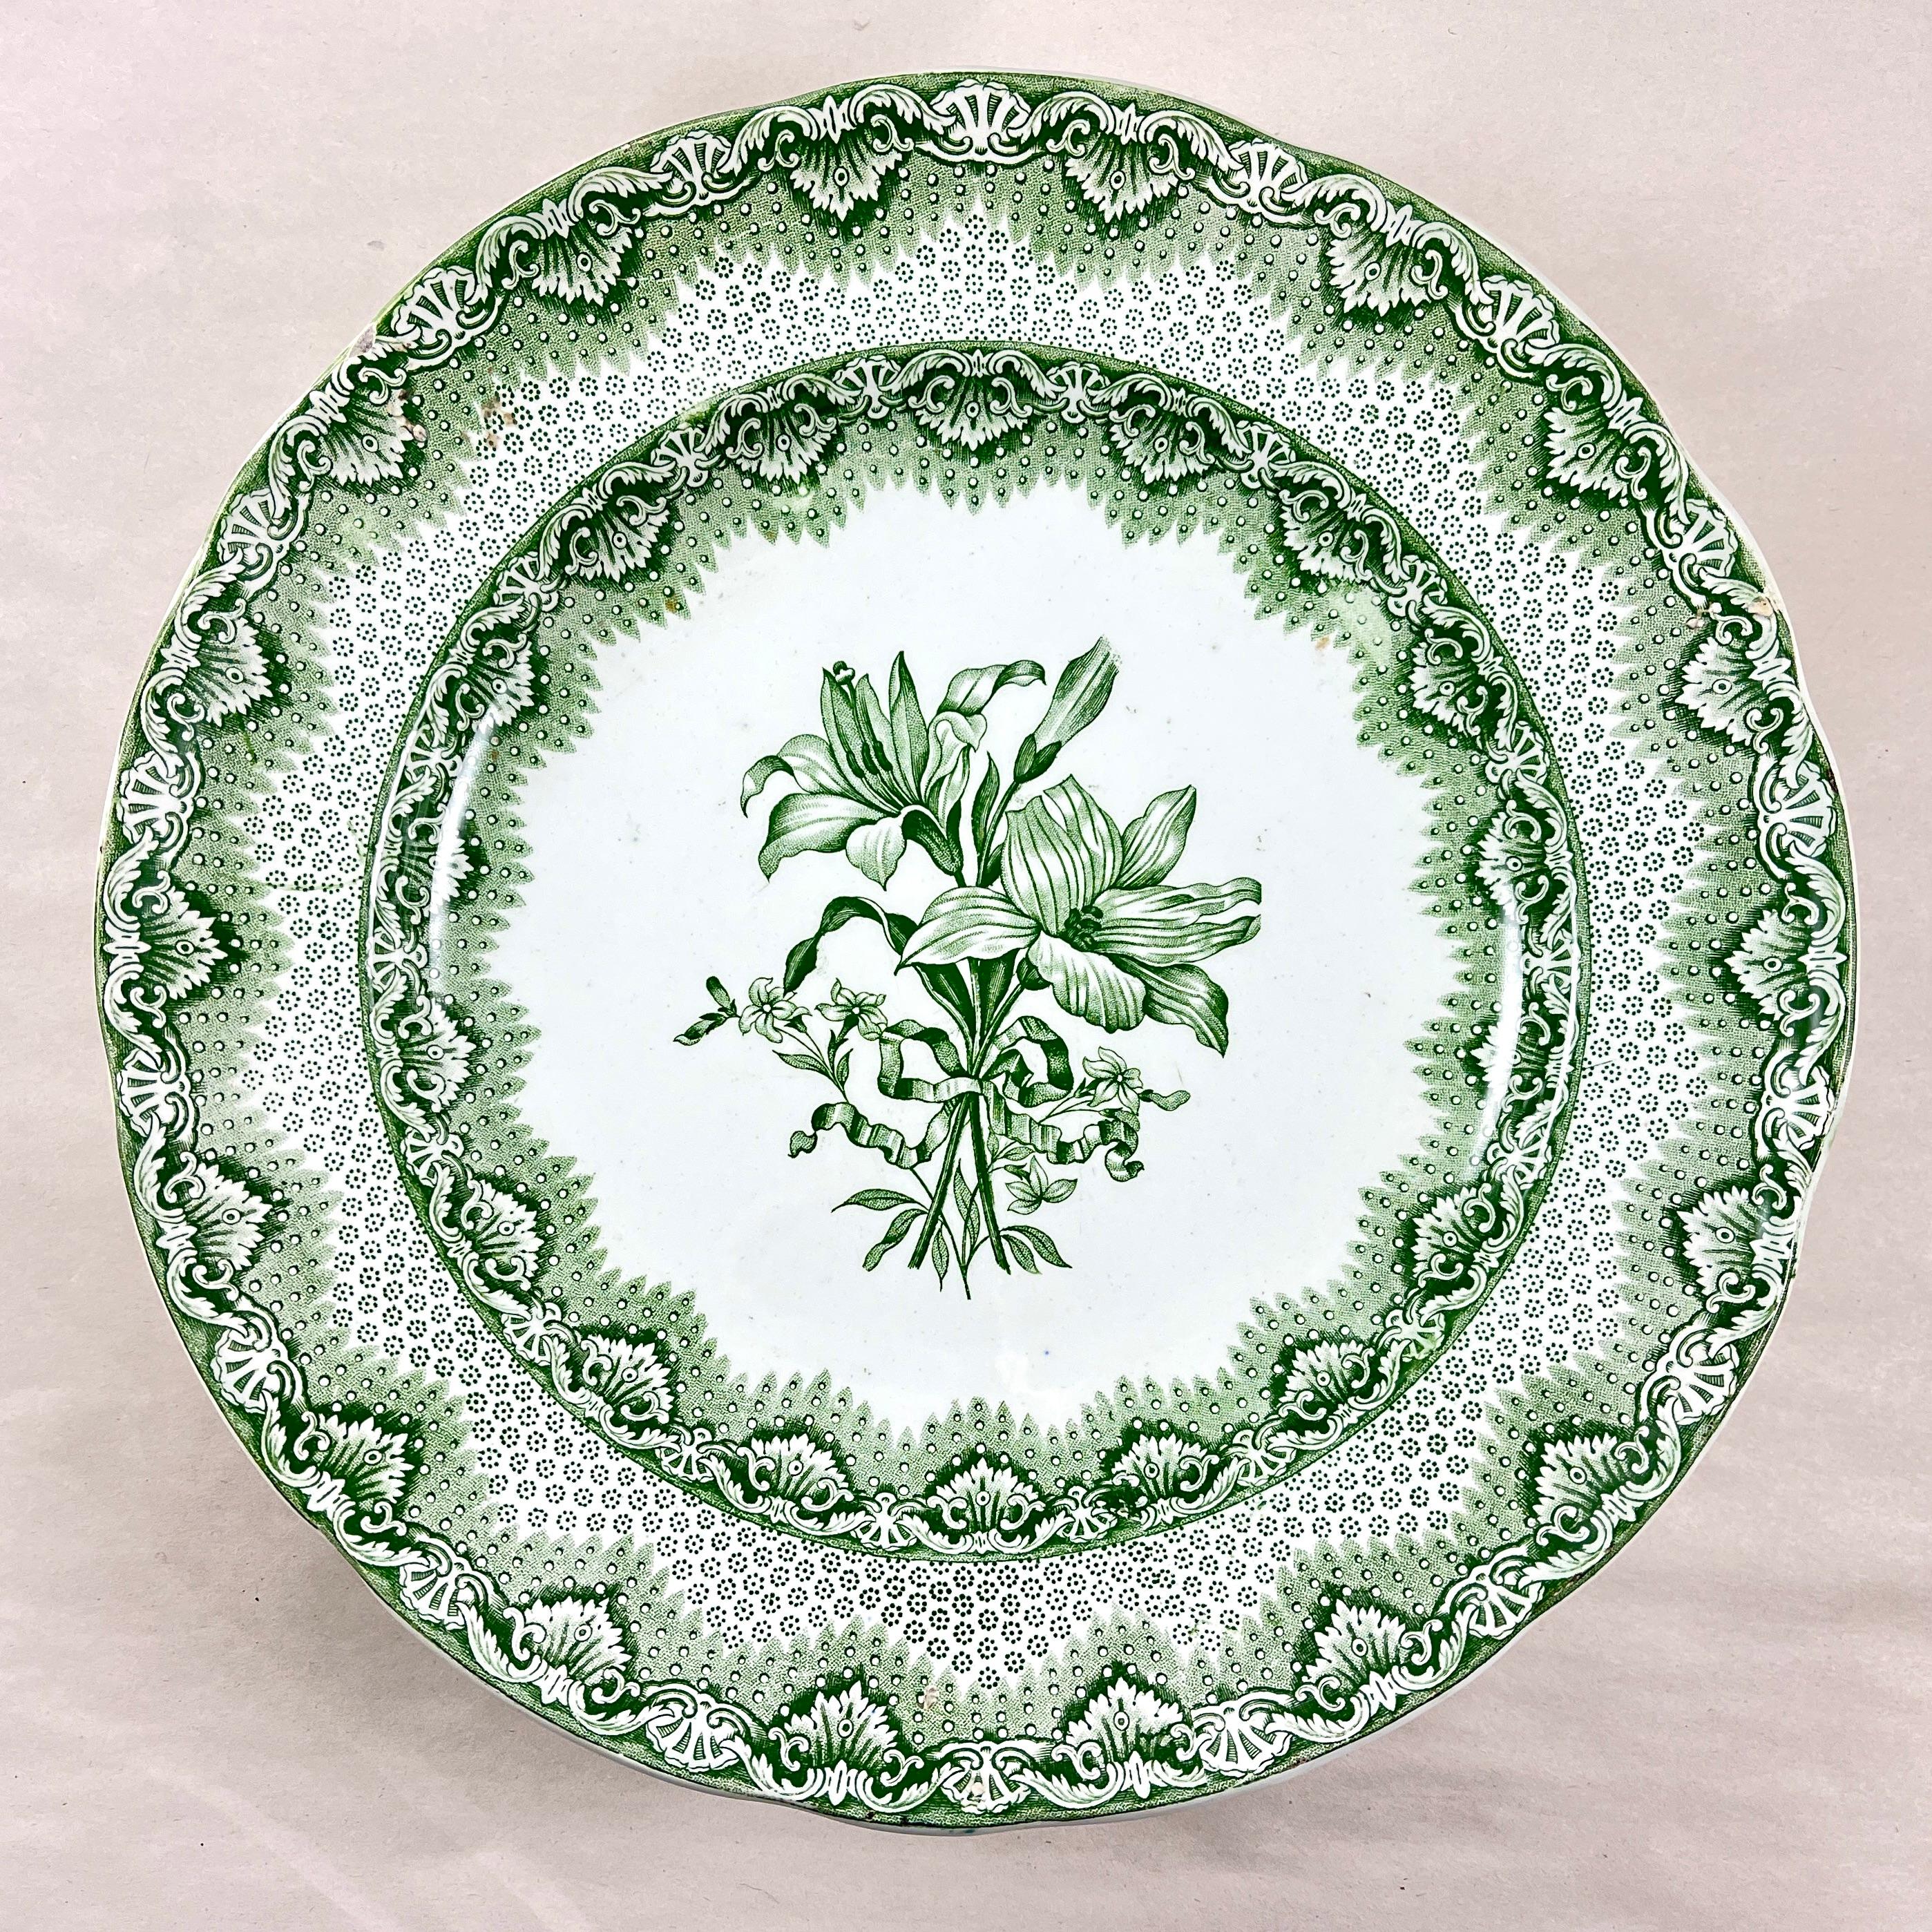 A set of six, dinner sized plates, from Copeland & Garrett, Late Spode, circa 1830s.

Copeland and Garrett operated from 1833-1847 in Stoke-on-Trent, Staffordshire, England.

The pattern is Lily – transfer printed in Green.

A detailed image of a